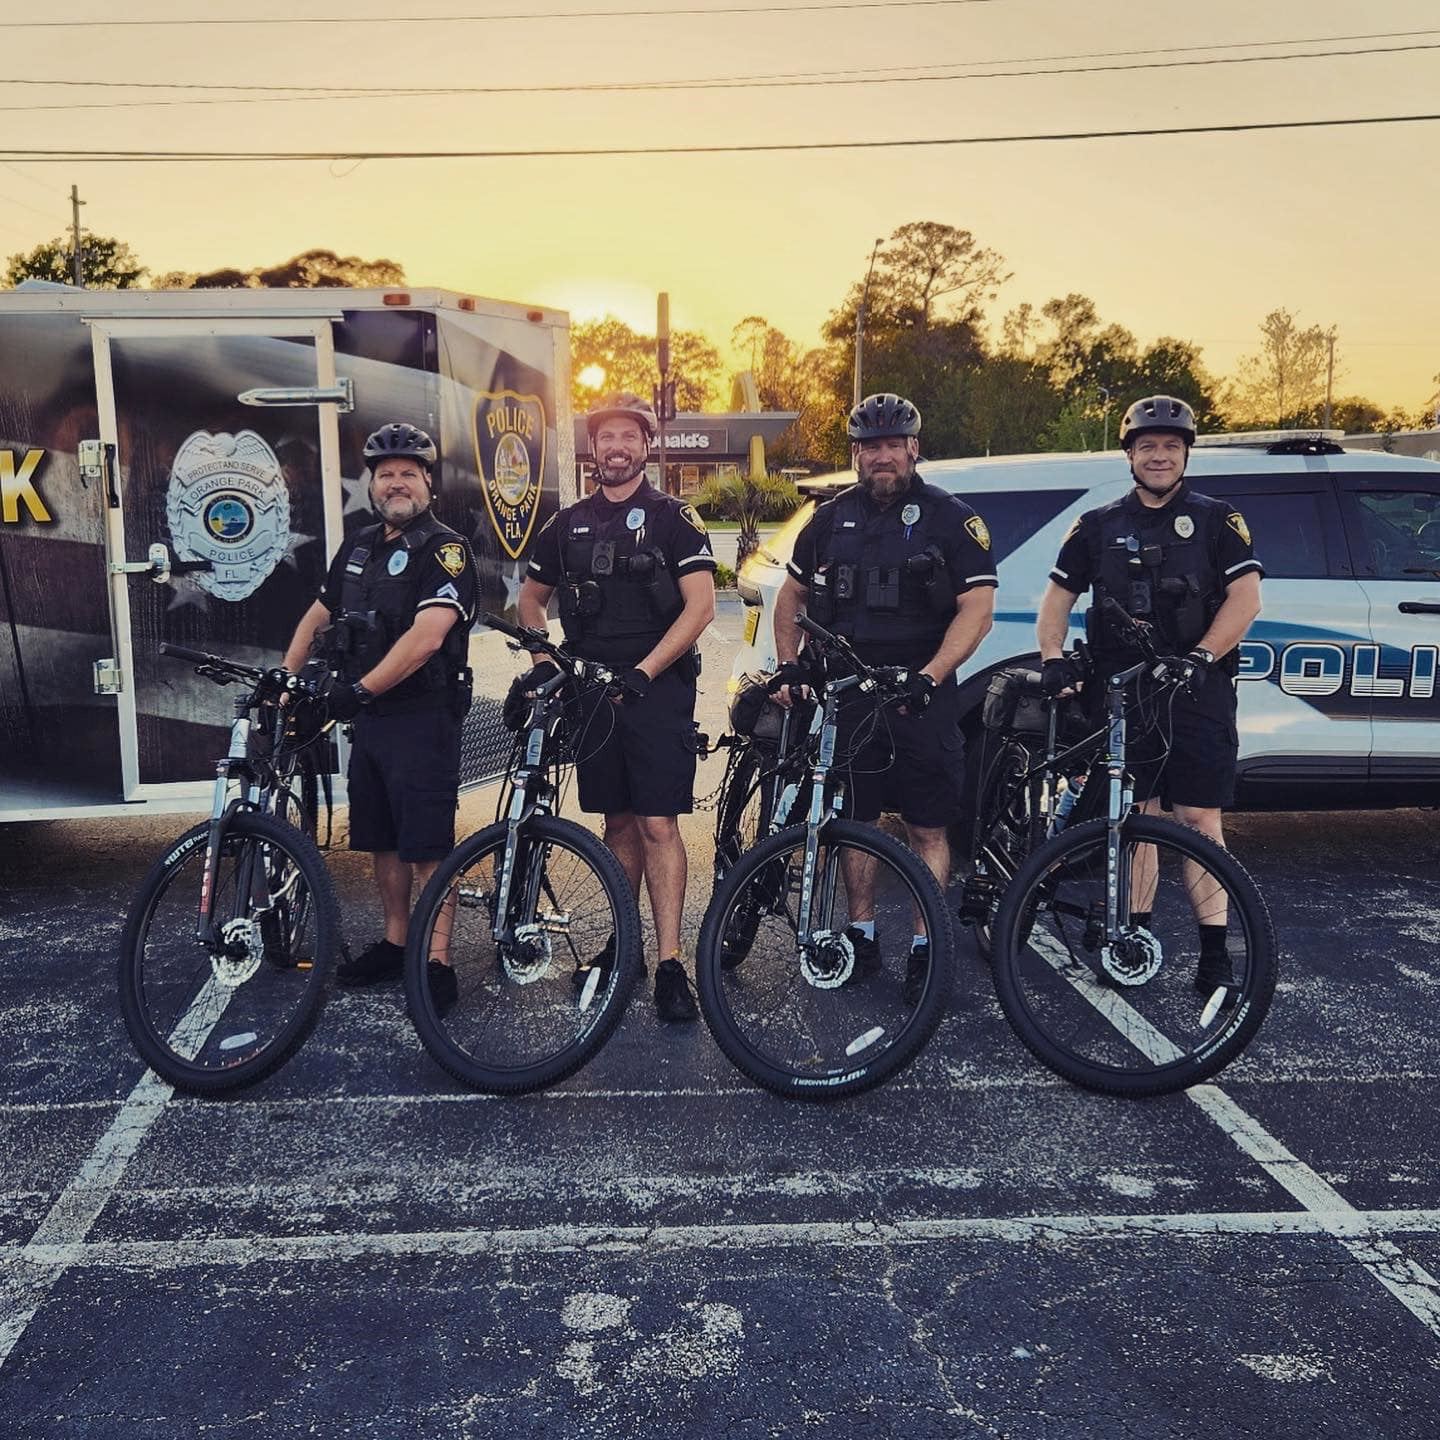 4 police officers on bikes